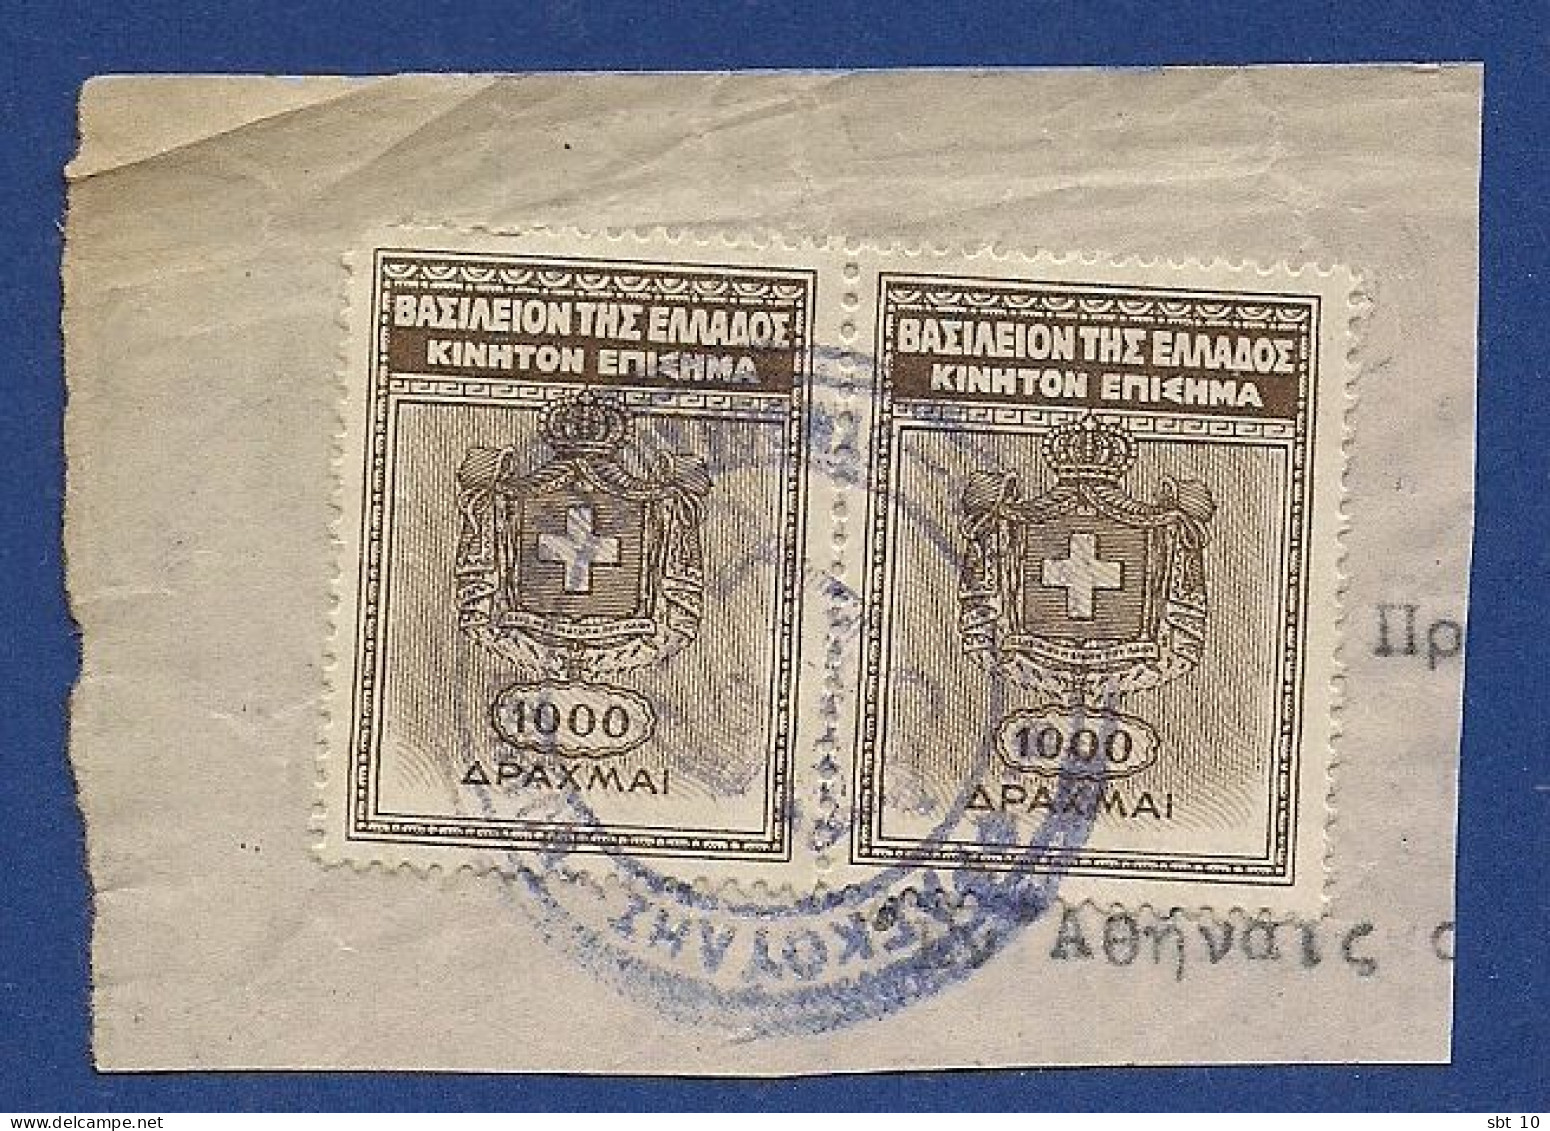 Greece - Kingdom Of Greece 1000dr. X2 Revenue Stamps - Used - Revenue Stamps